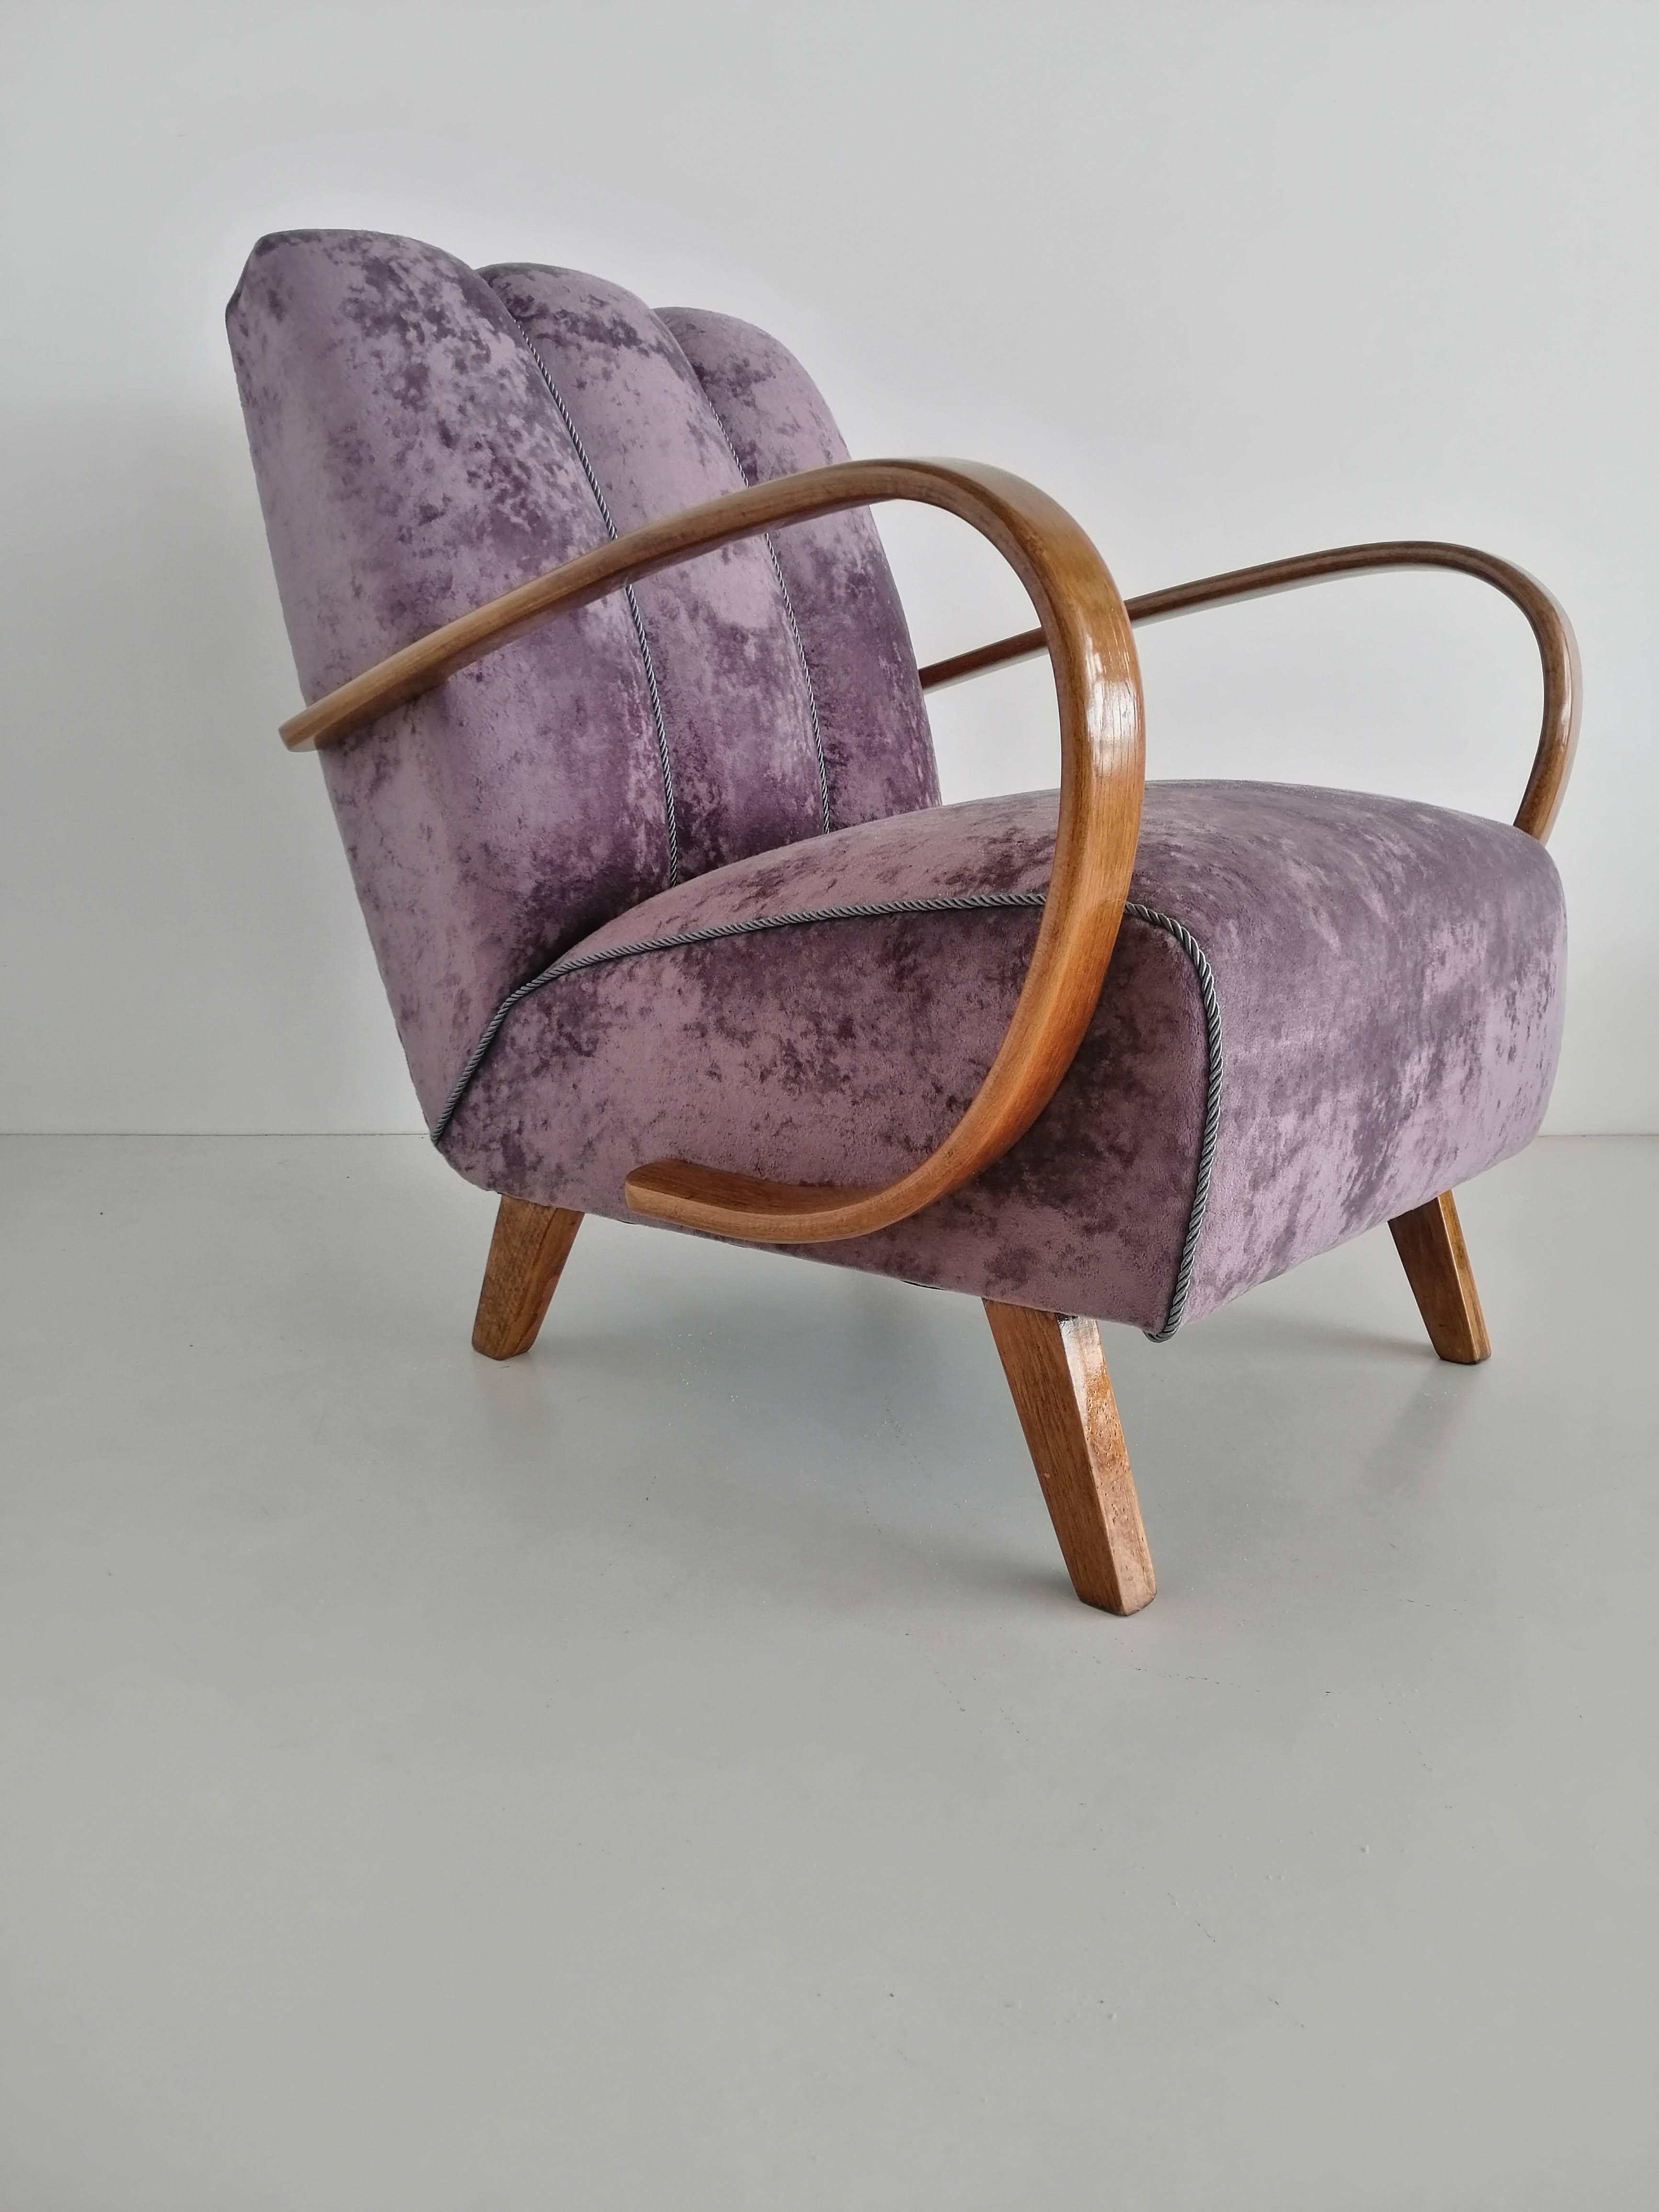 Art Deco armchair from 1940 Czech Republic.
Designed by a famous Czech designer Jindrich Halabala, (a Czech designer ranked among the most outstanding creators of the modern period. The peak of his career fell on the 1930s and 1940s when he worked